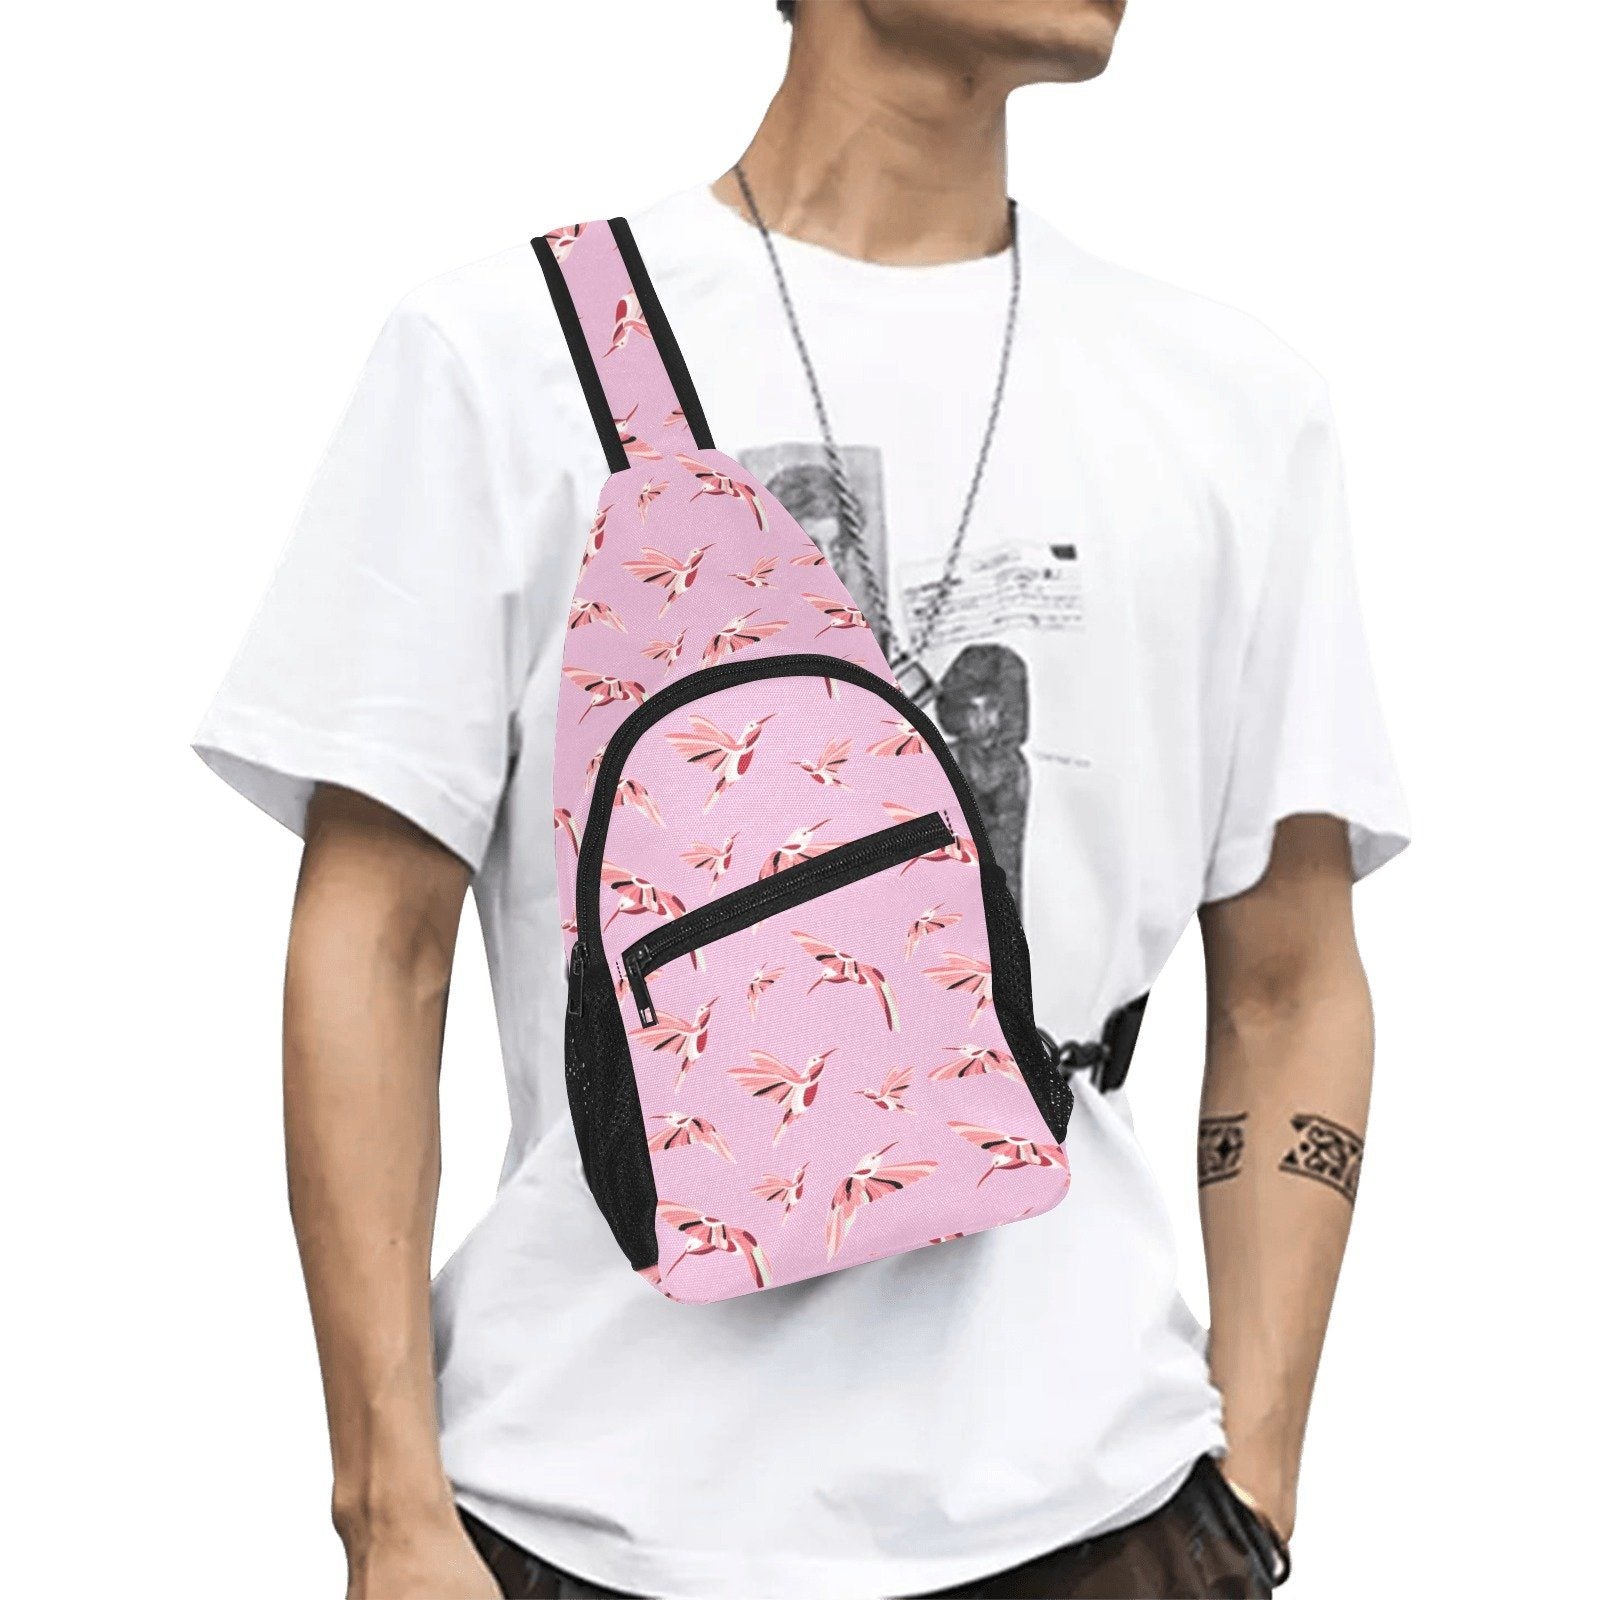 Strawberry Pink All Over Print Chest Bag (Model 1719) All Over Print Chest Bag (1719) e-joyer 